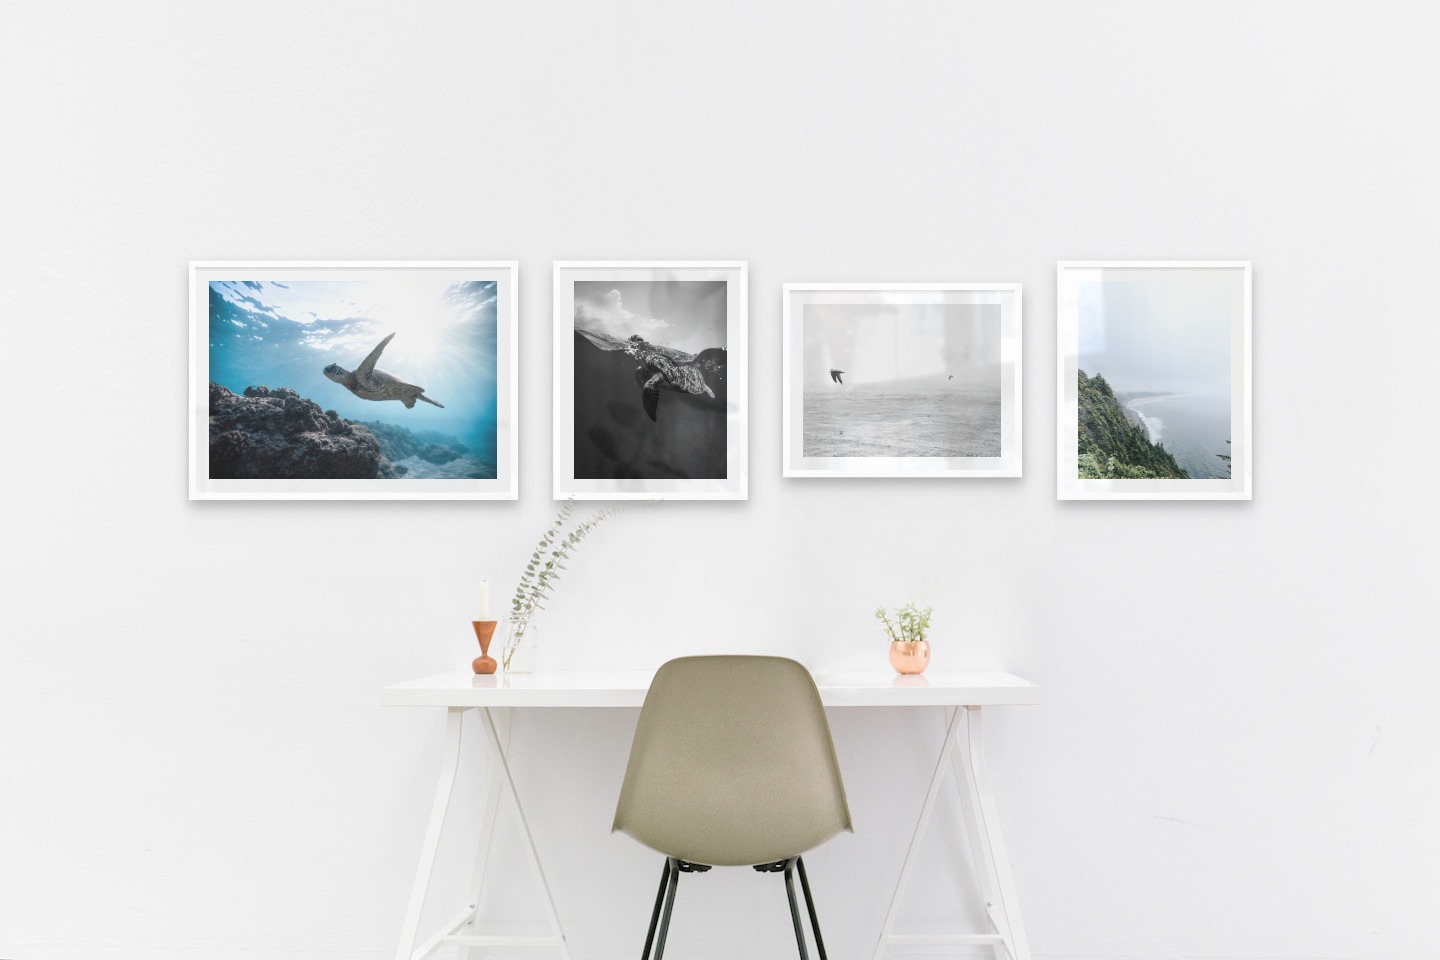 Gallery wall with picture frames in white in sizes 50x70 and 40x50 with prints "Turtle in the water", "Turtle", "Birds over the sea" and "Rocks facing the water"